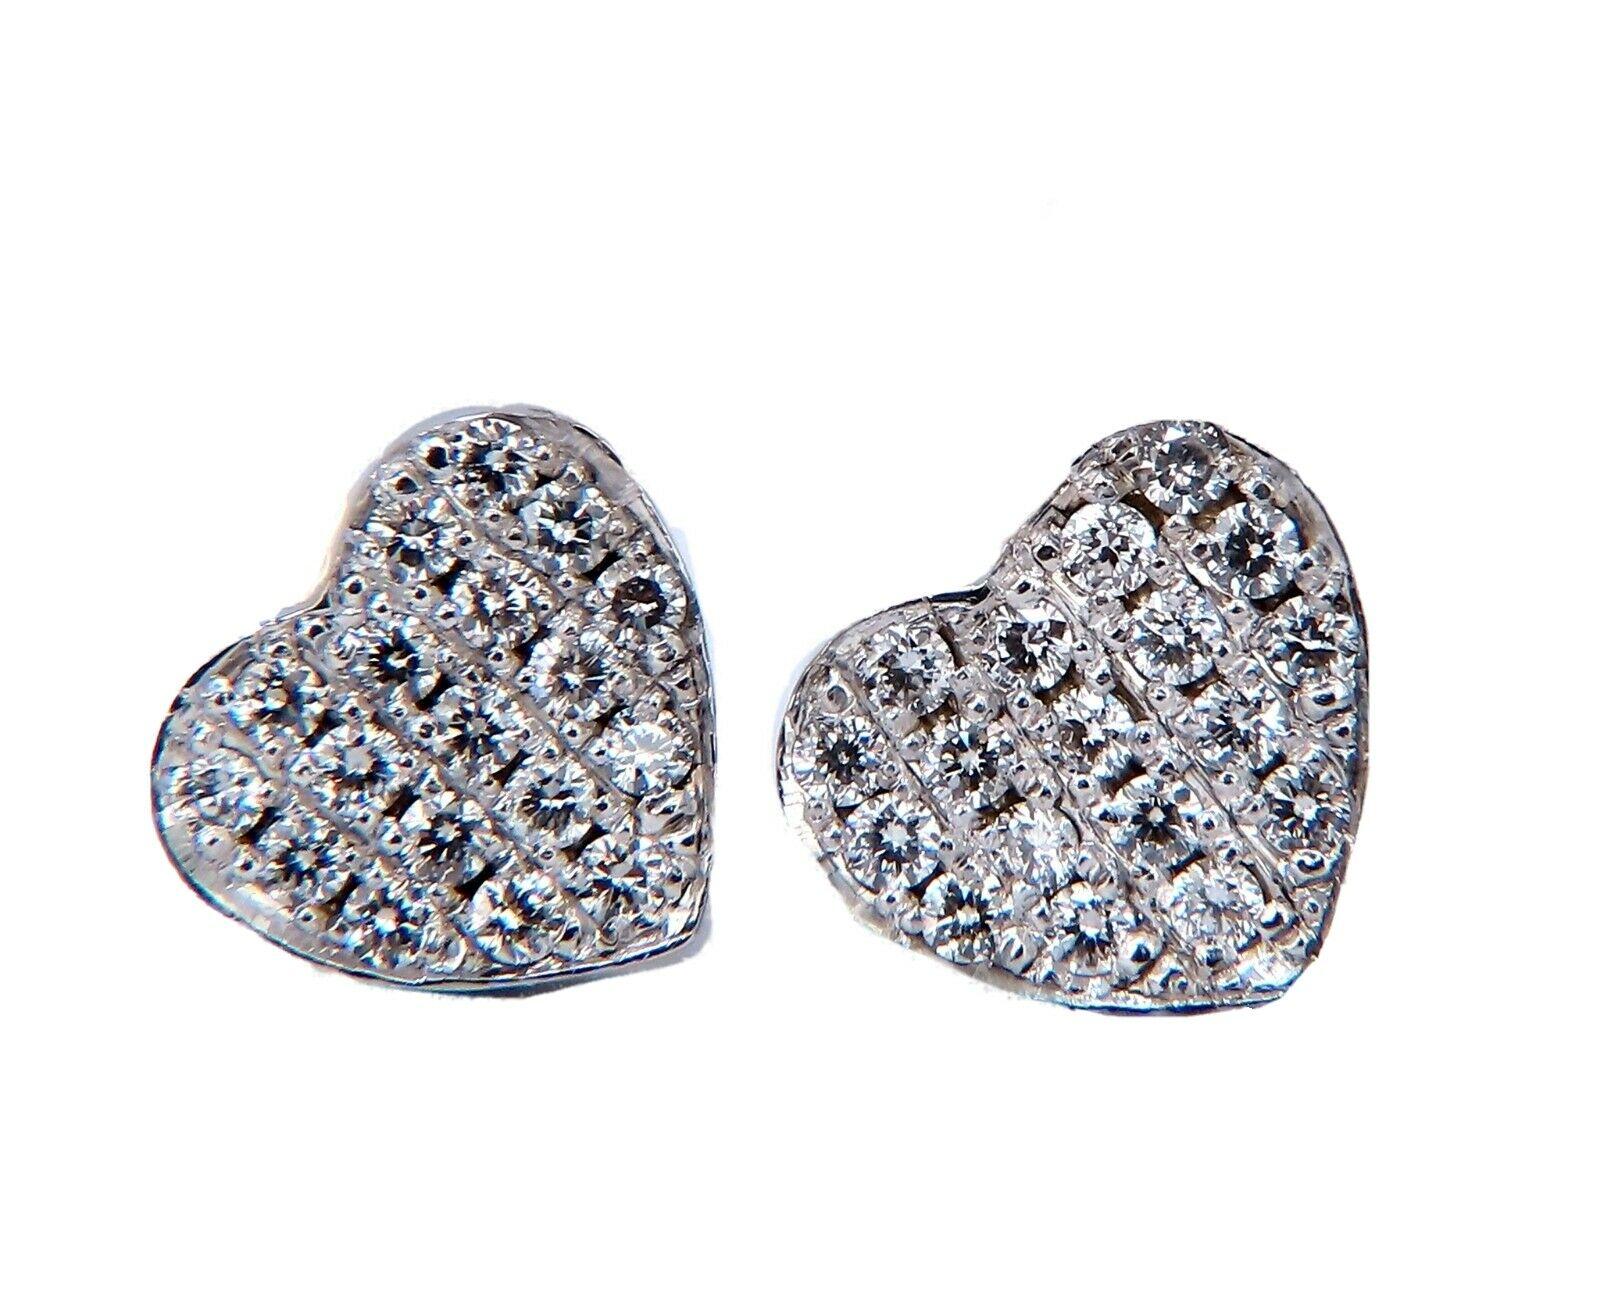 Heart pave diamond earrings.

.56 carat natural round diamonds

G color vs2 clarity

14 karat white gold 3.6 grams

Earrings measure 8.4 x 9.1 mm

$3500 appraisal certificate to accompany